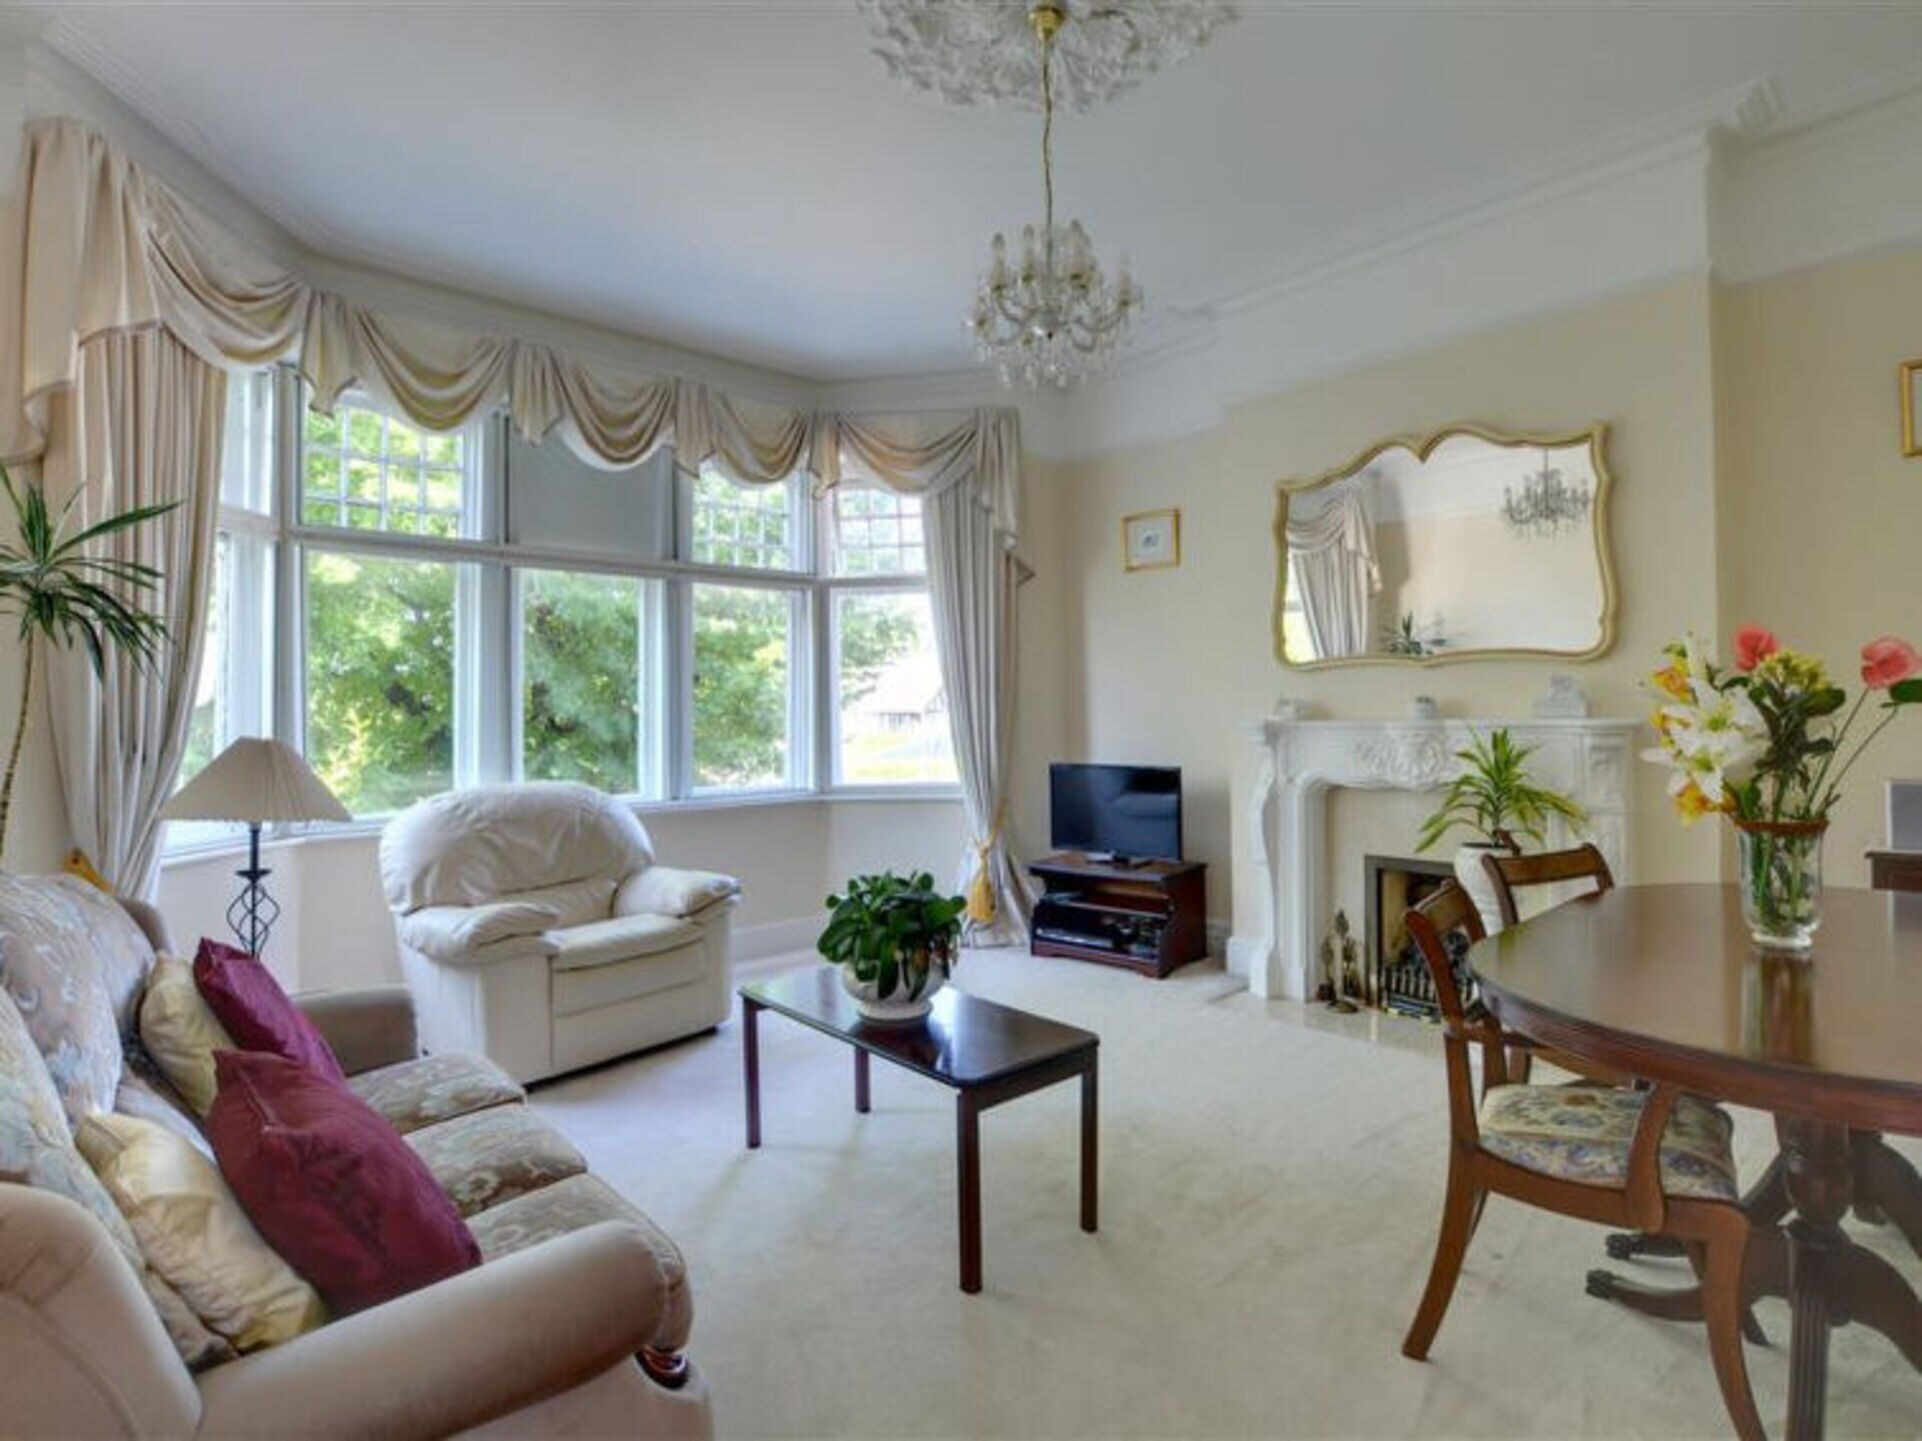 Property Image 2 - The Ultimate Villa with Stunning Views, England Villa 1246